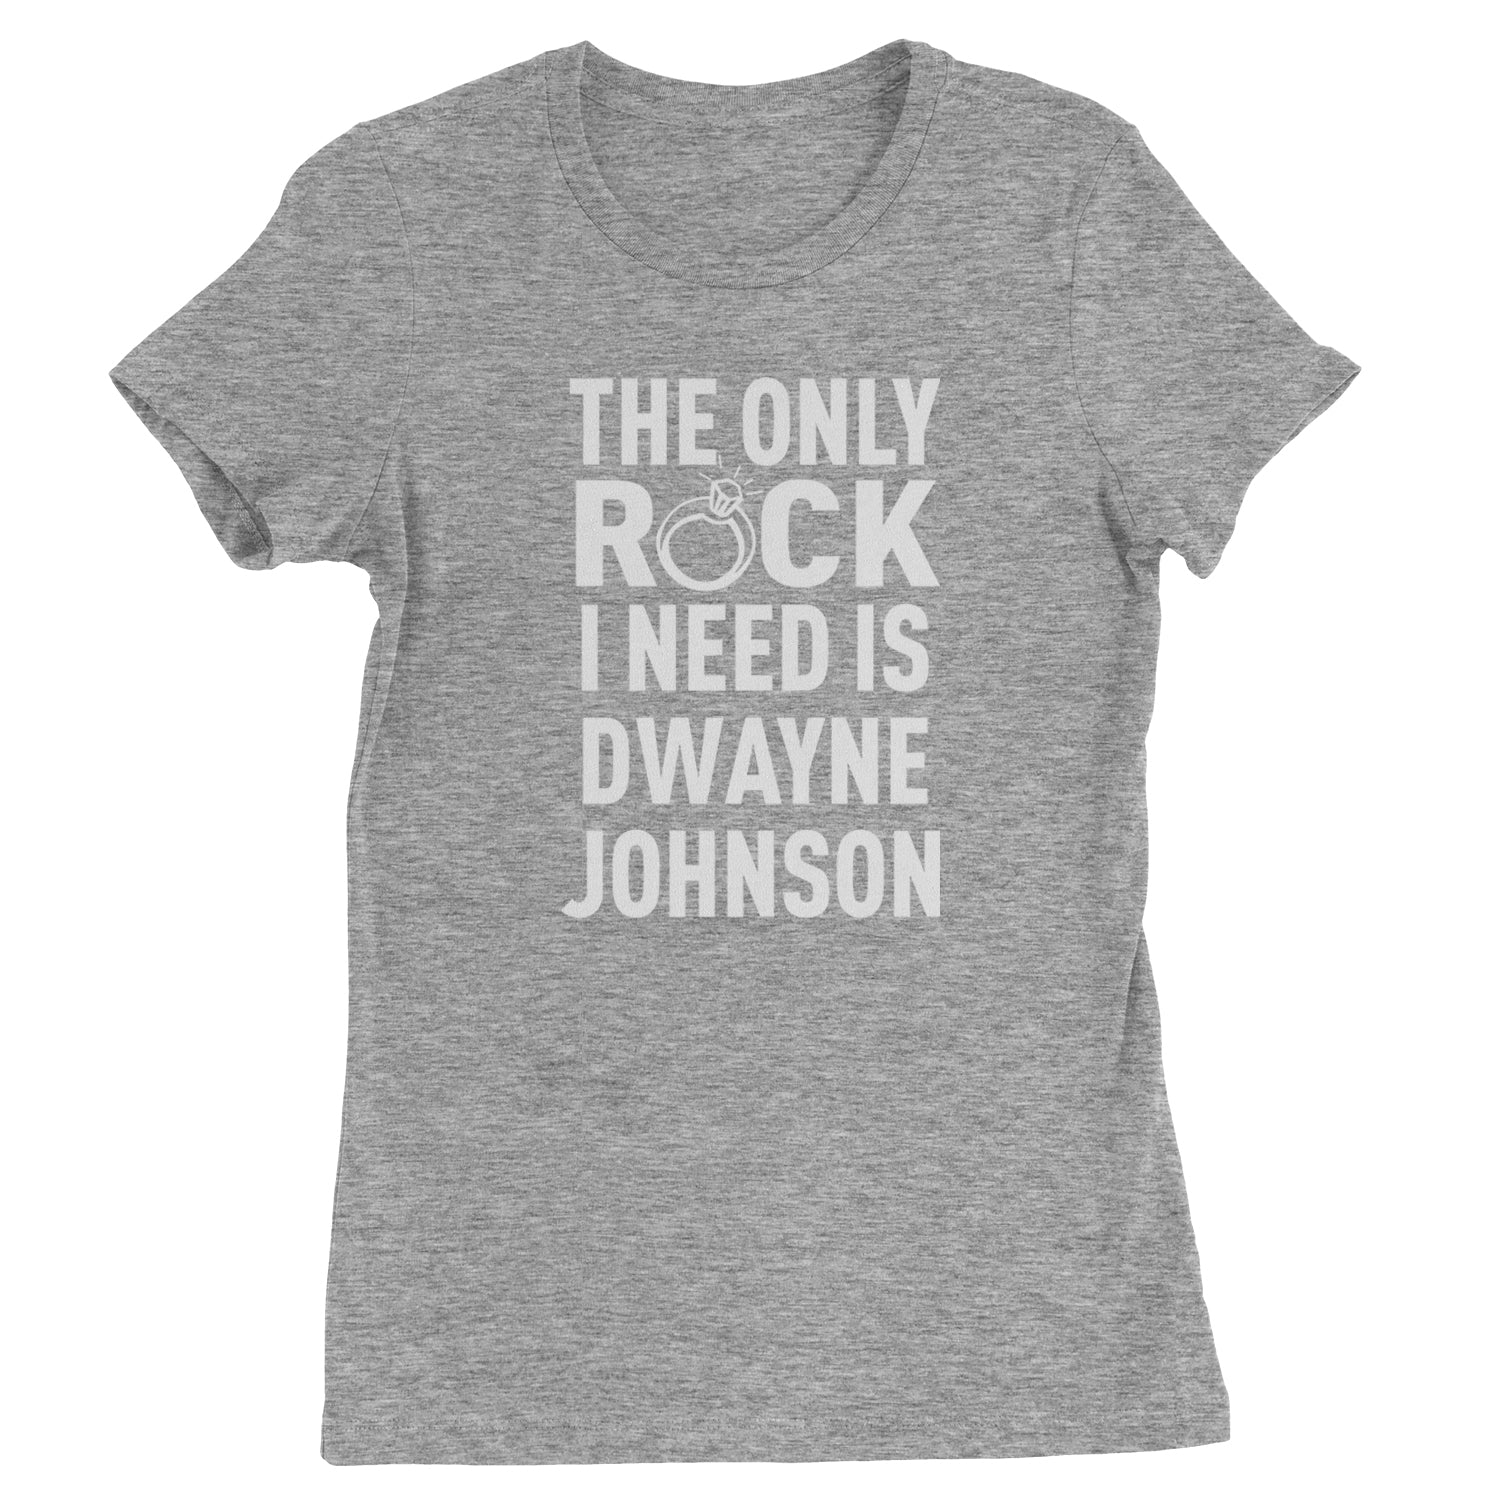 The Only Rock I Need Is Dwayne Johnson Womens T-shirt dwayne, johnson, marry, me, ring, rock, the, wedding by Expression Tees